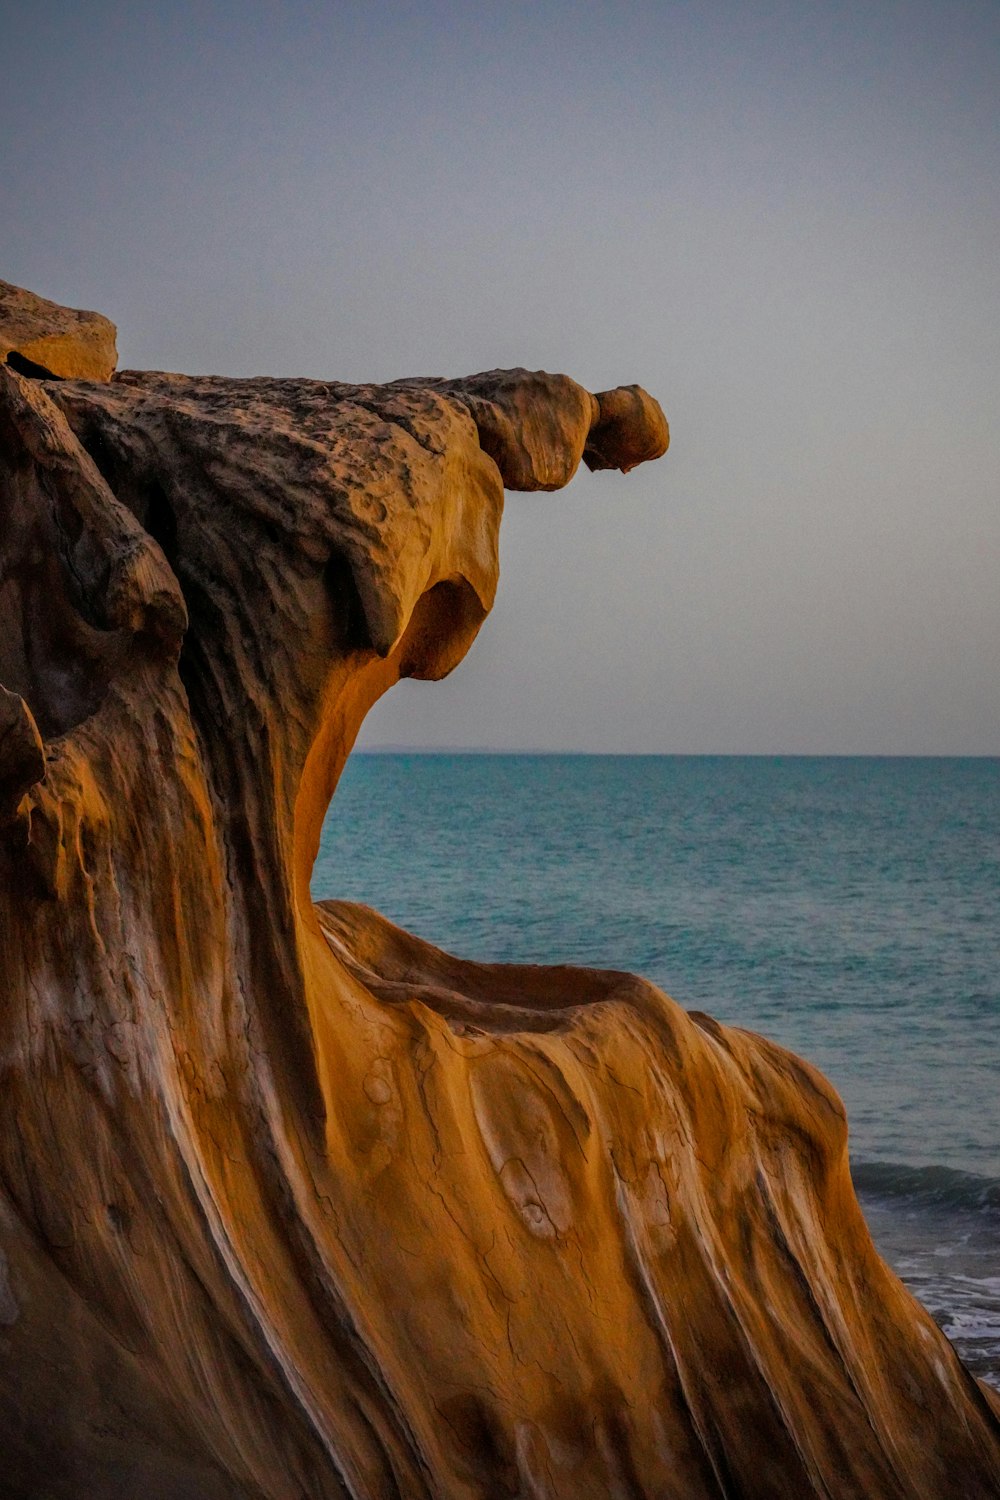 a large tree trunk sitting on top of a beach next to the ocean